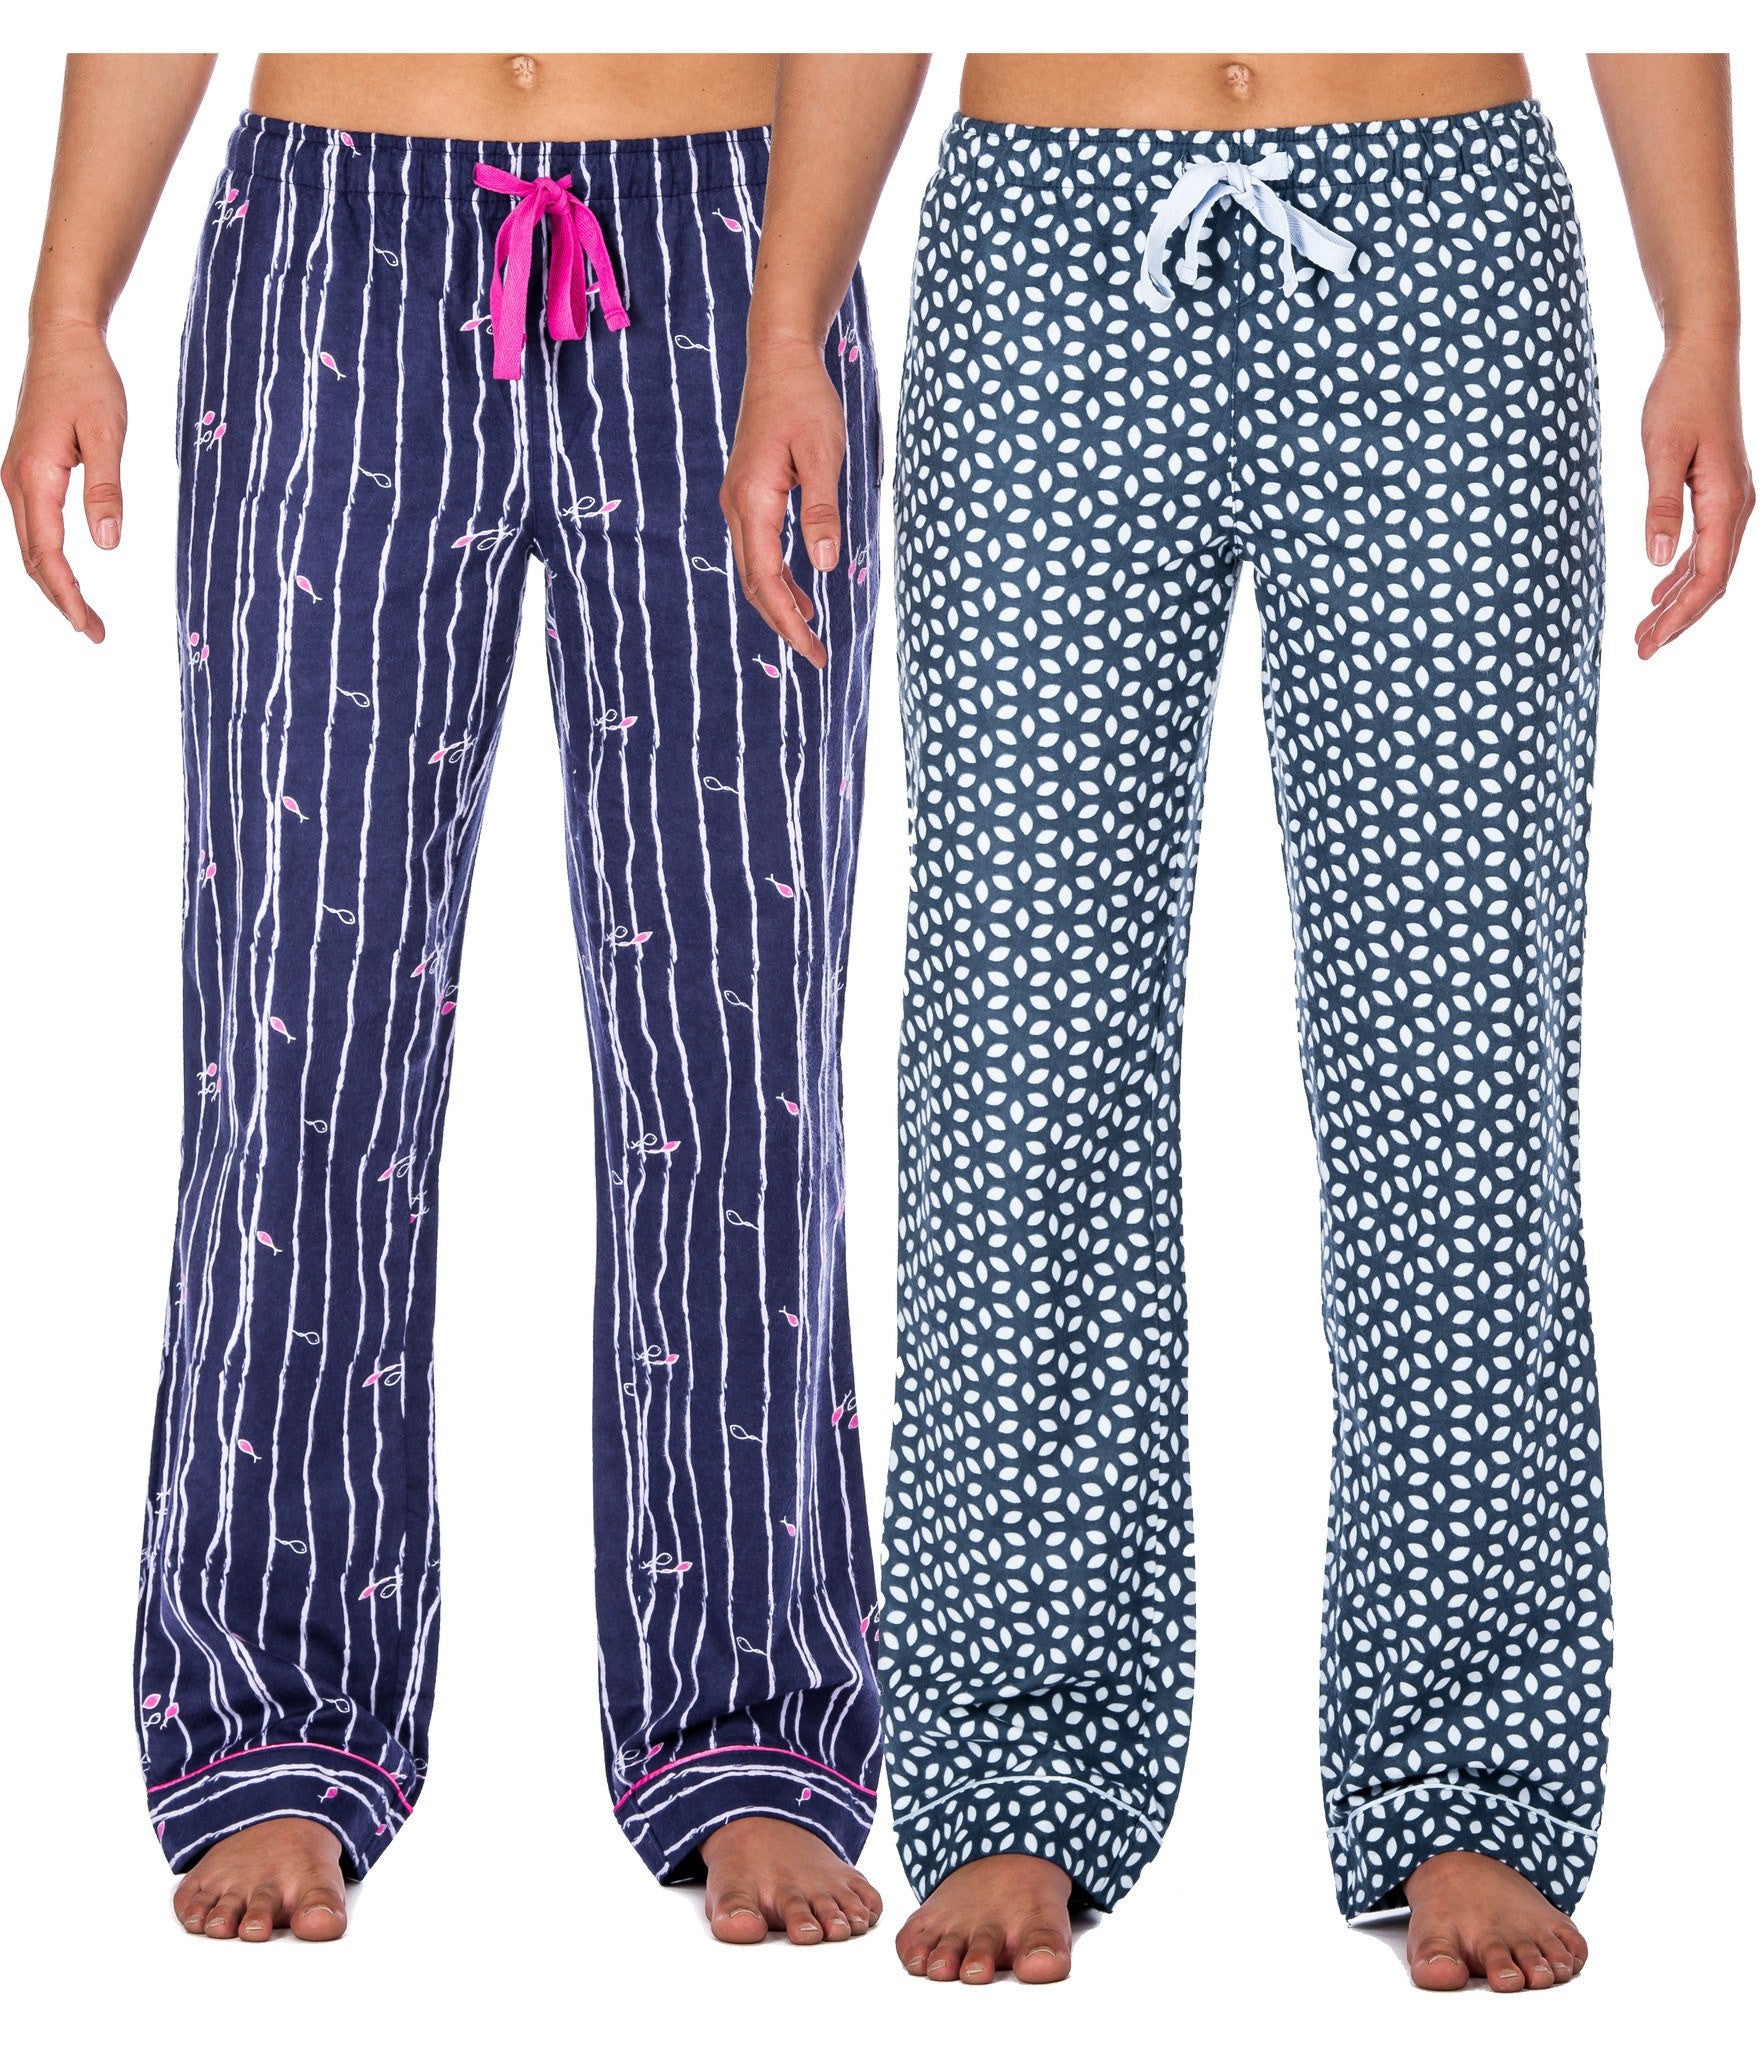 Women's Cotton Flannel Lounge Pants (2 Pack) - Relaxed Fit